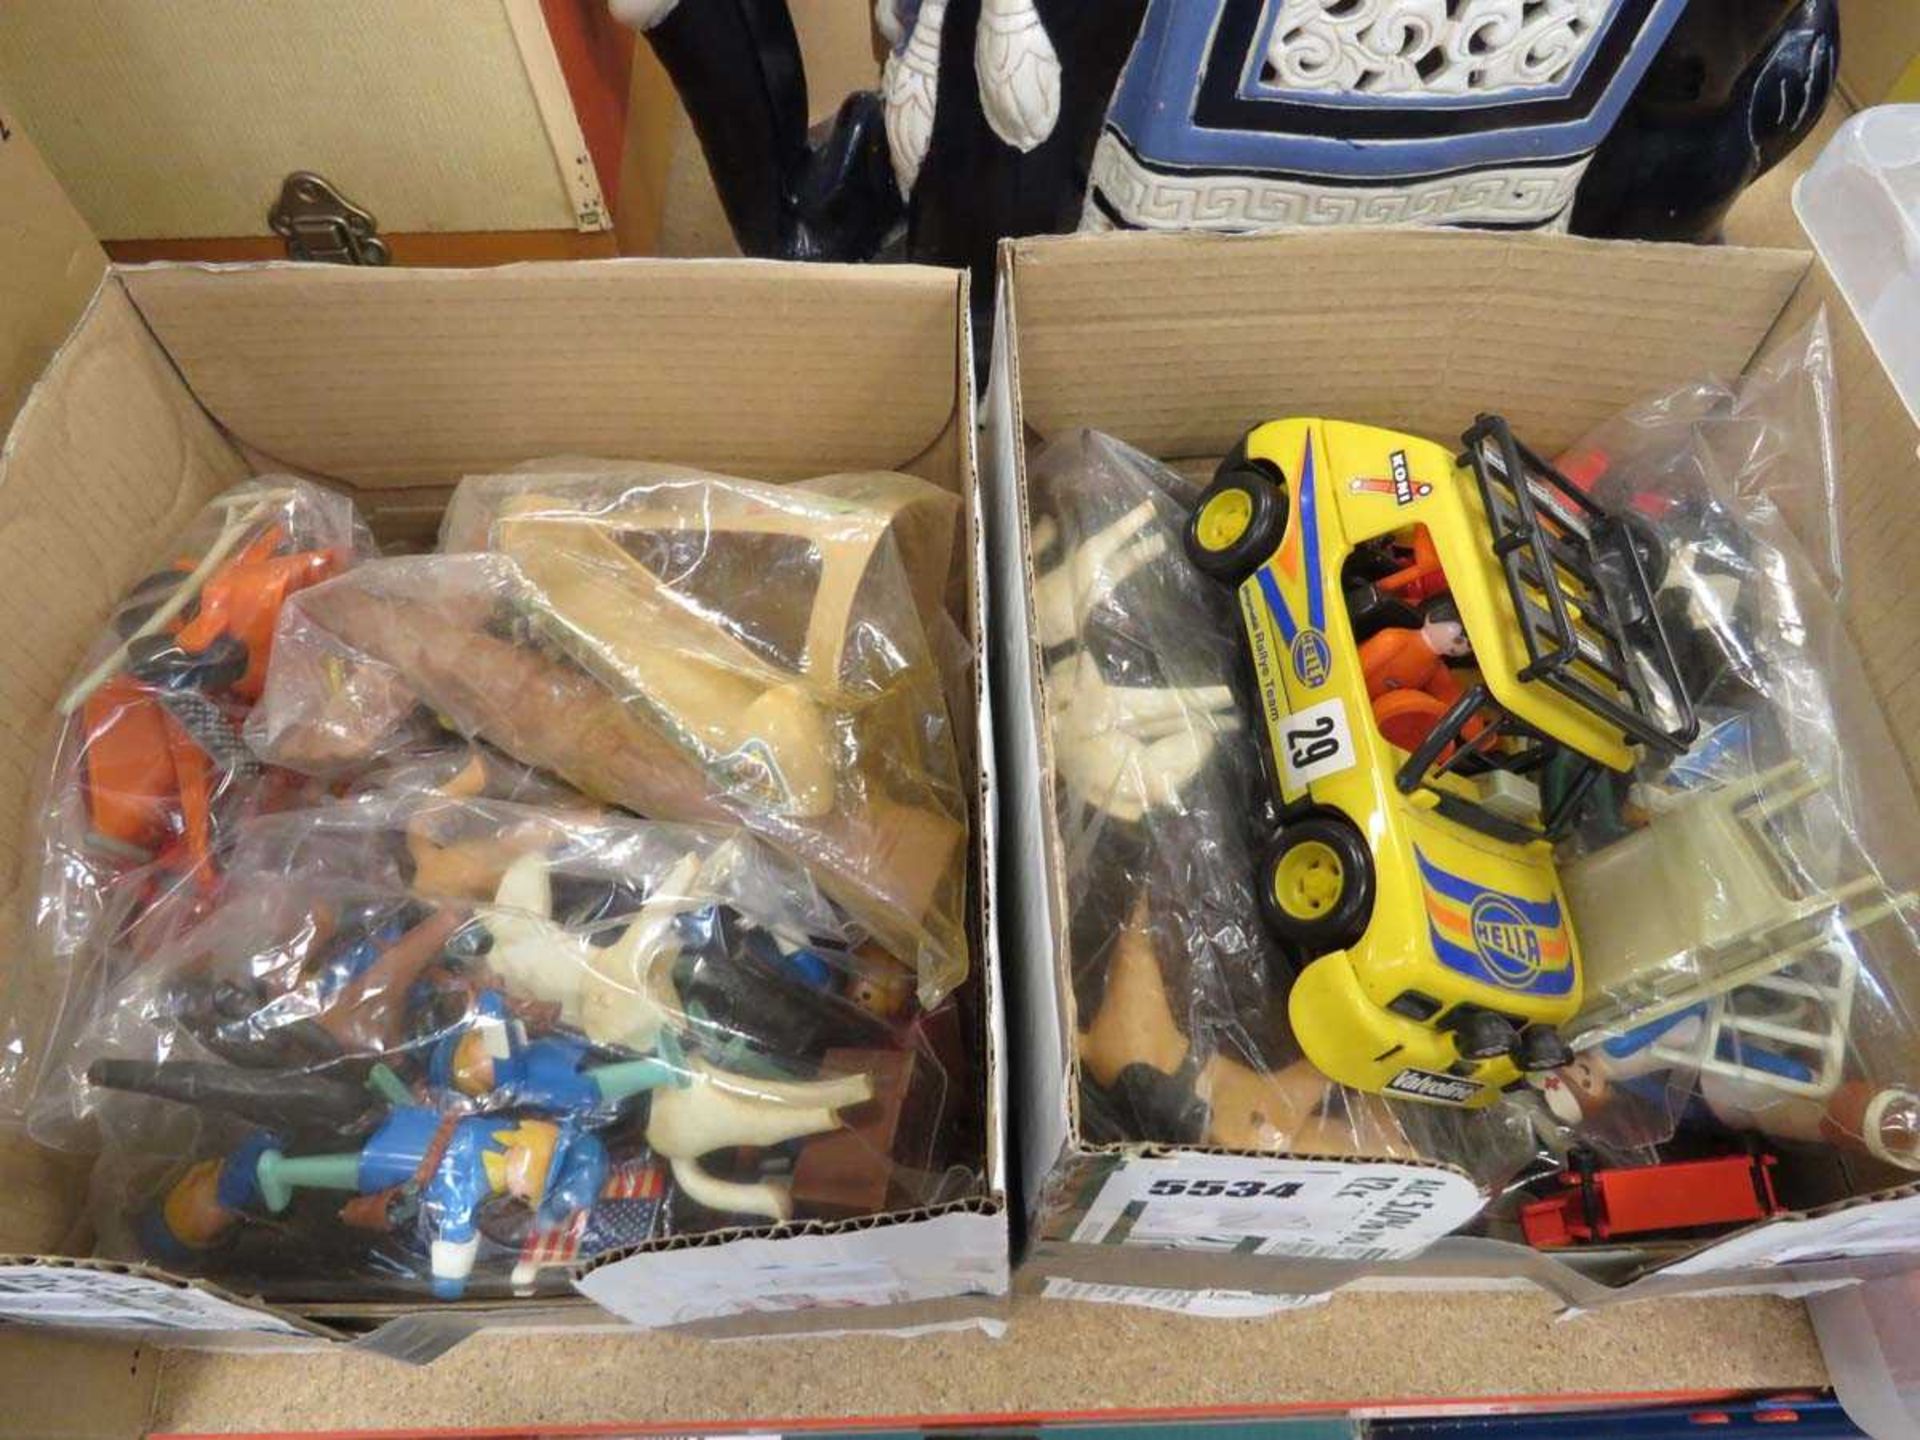 2 boxes containing plastic animals and other toys